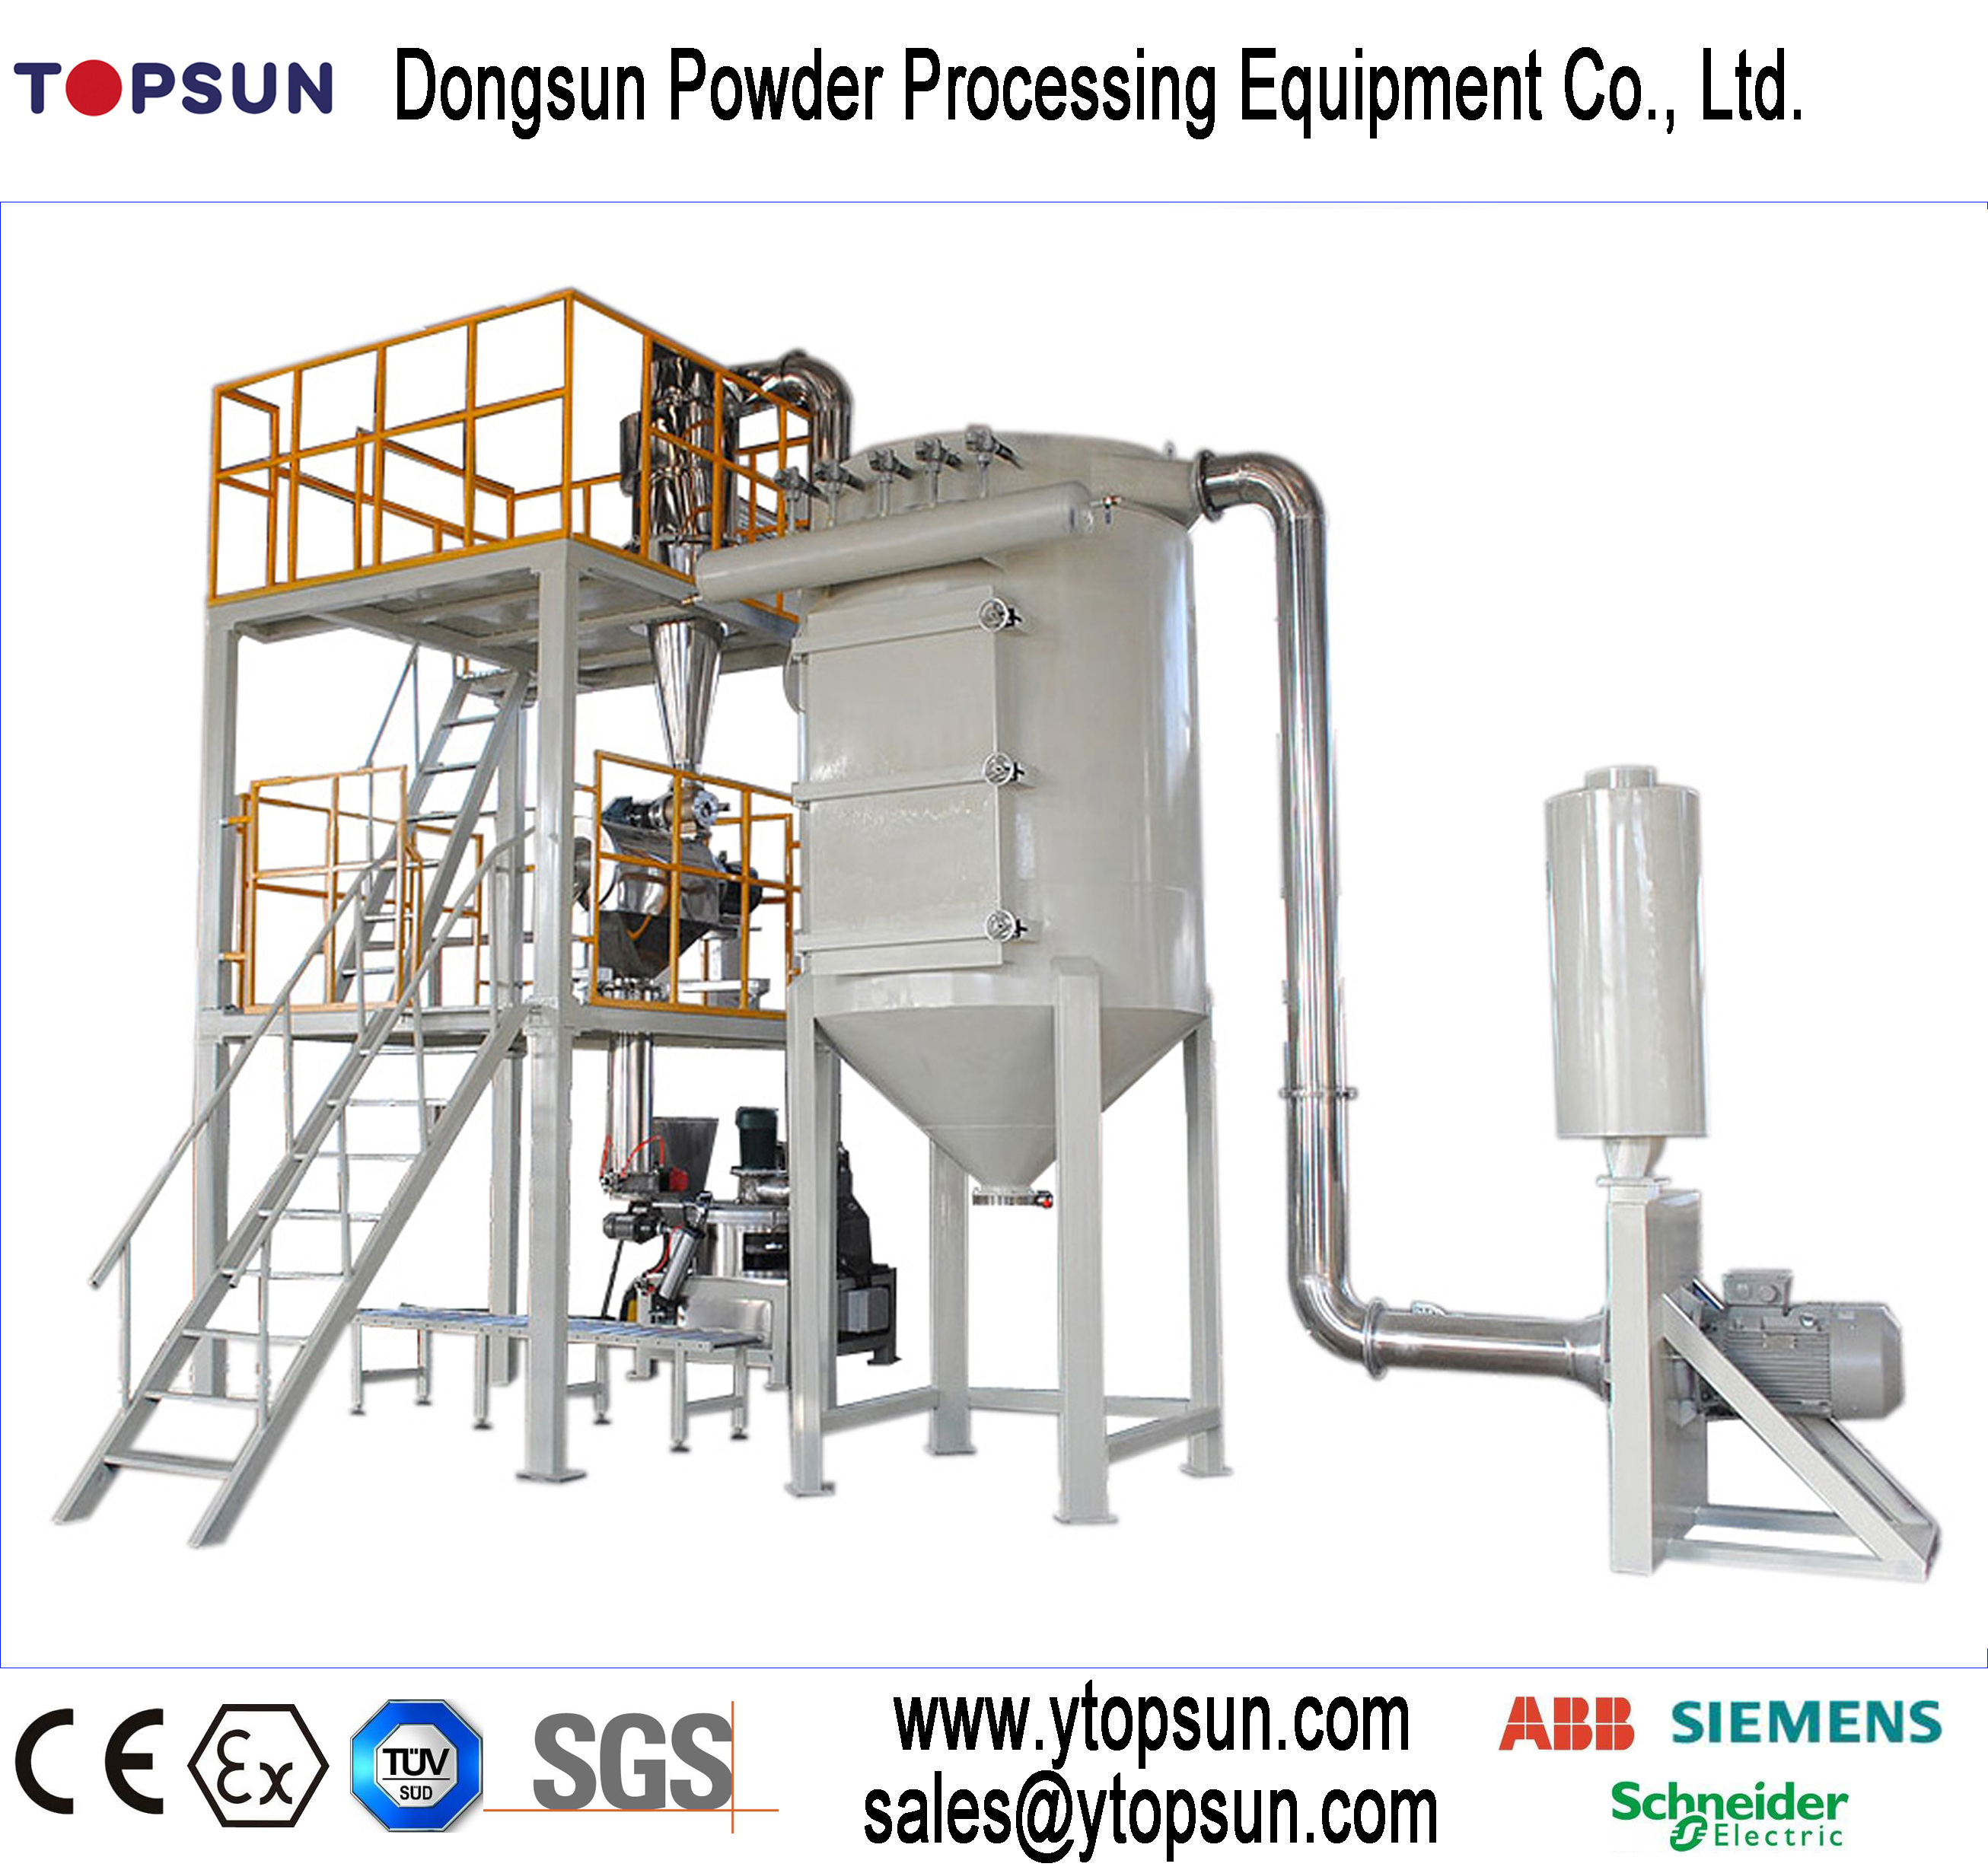 Airlock 1000Kg Electrostatic Powder ACM MILL With Adopted Superfine Powder Dust collector designed 